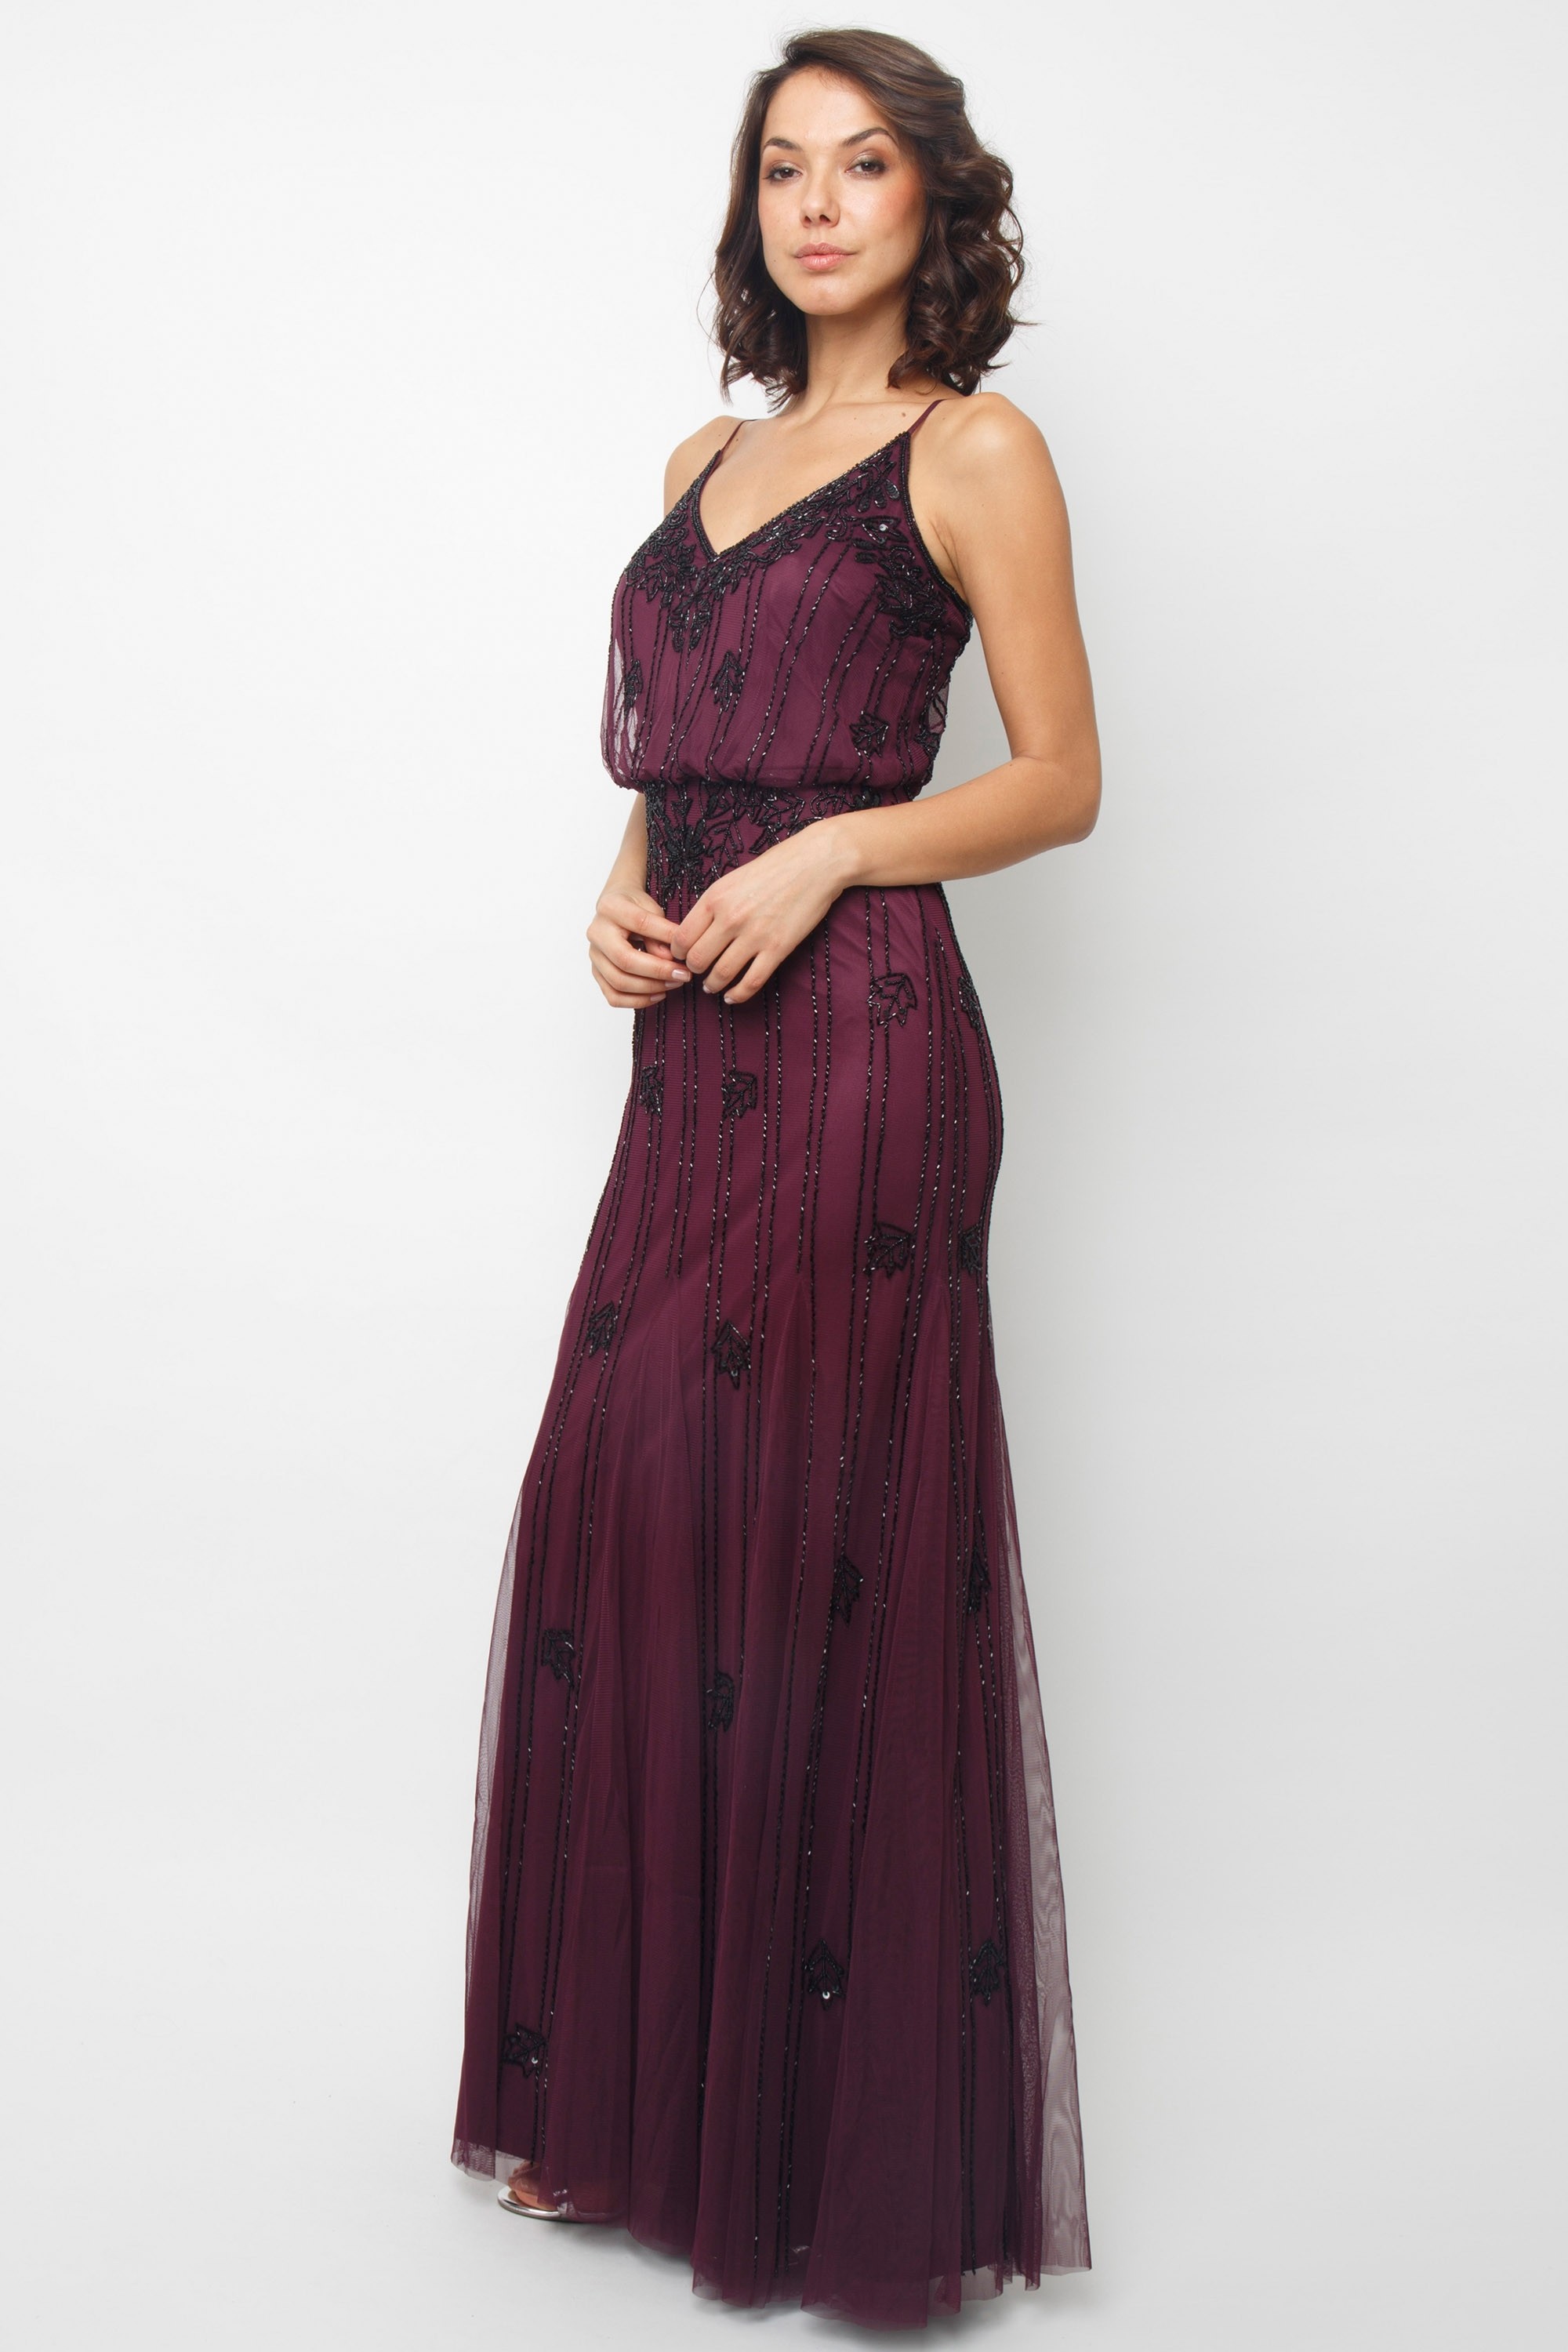 LACE&BEADS KEEVA BURGUNDY MAXI DRESS | LACE&BEADS PARTY DRESS